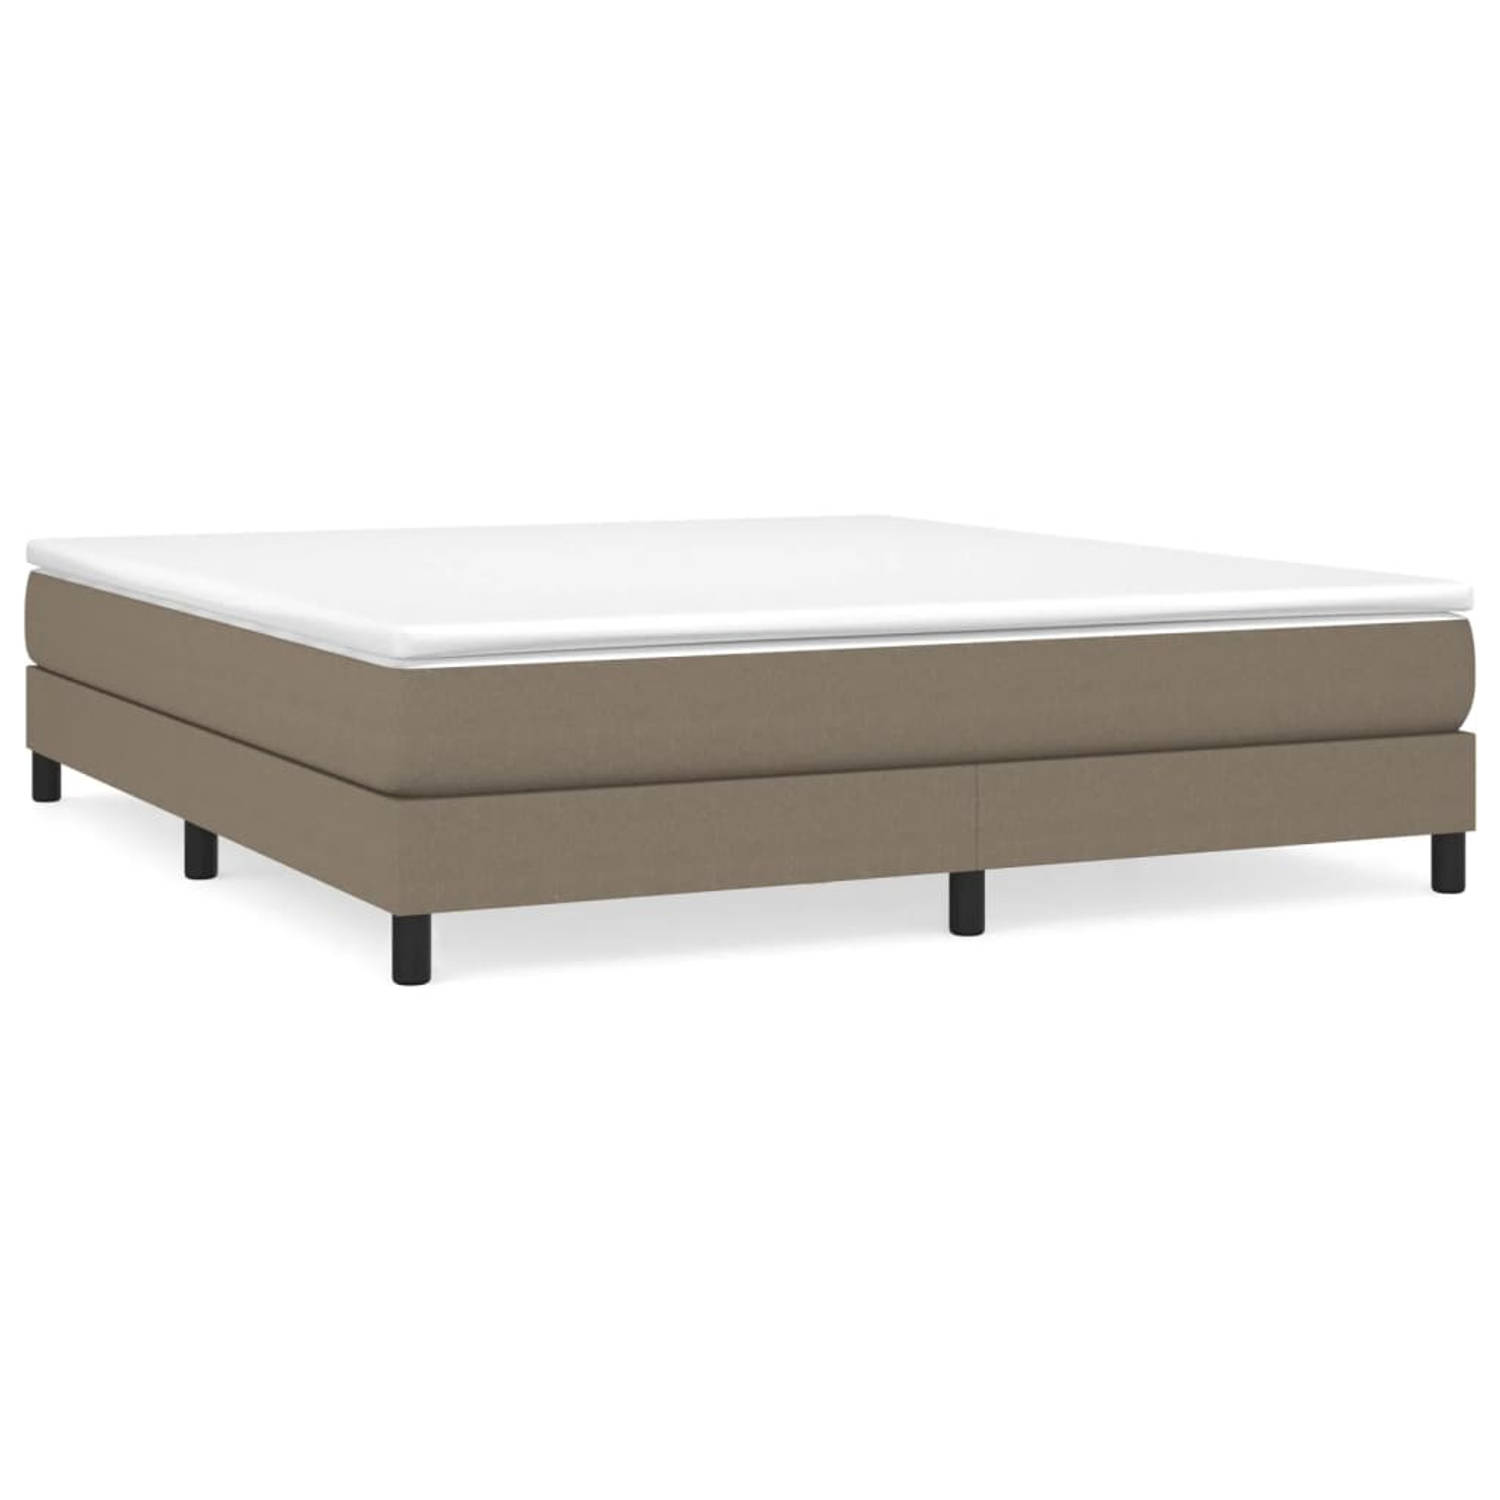 The Living Store Boxspringframe stof taupe 180x200 cm - Boxspringframe - Boxspringframes - Bed - Ledikant - Slaapmeubel - Bedframe - Bedbodem - Tweepersoonsbed - Boxspring - Bedden